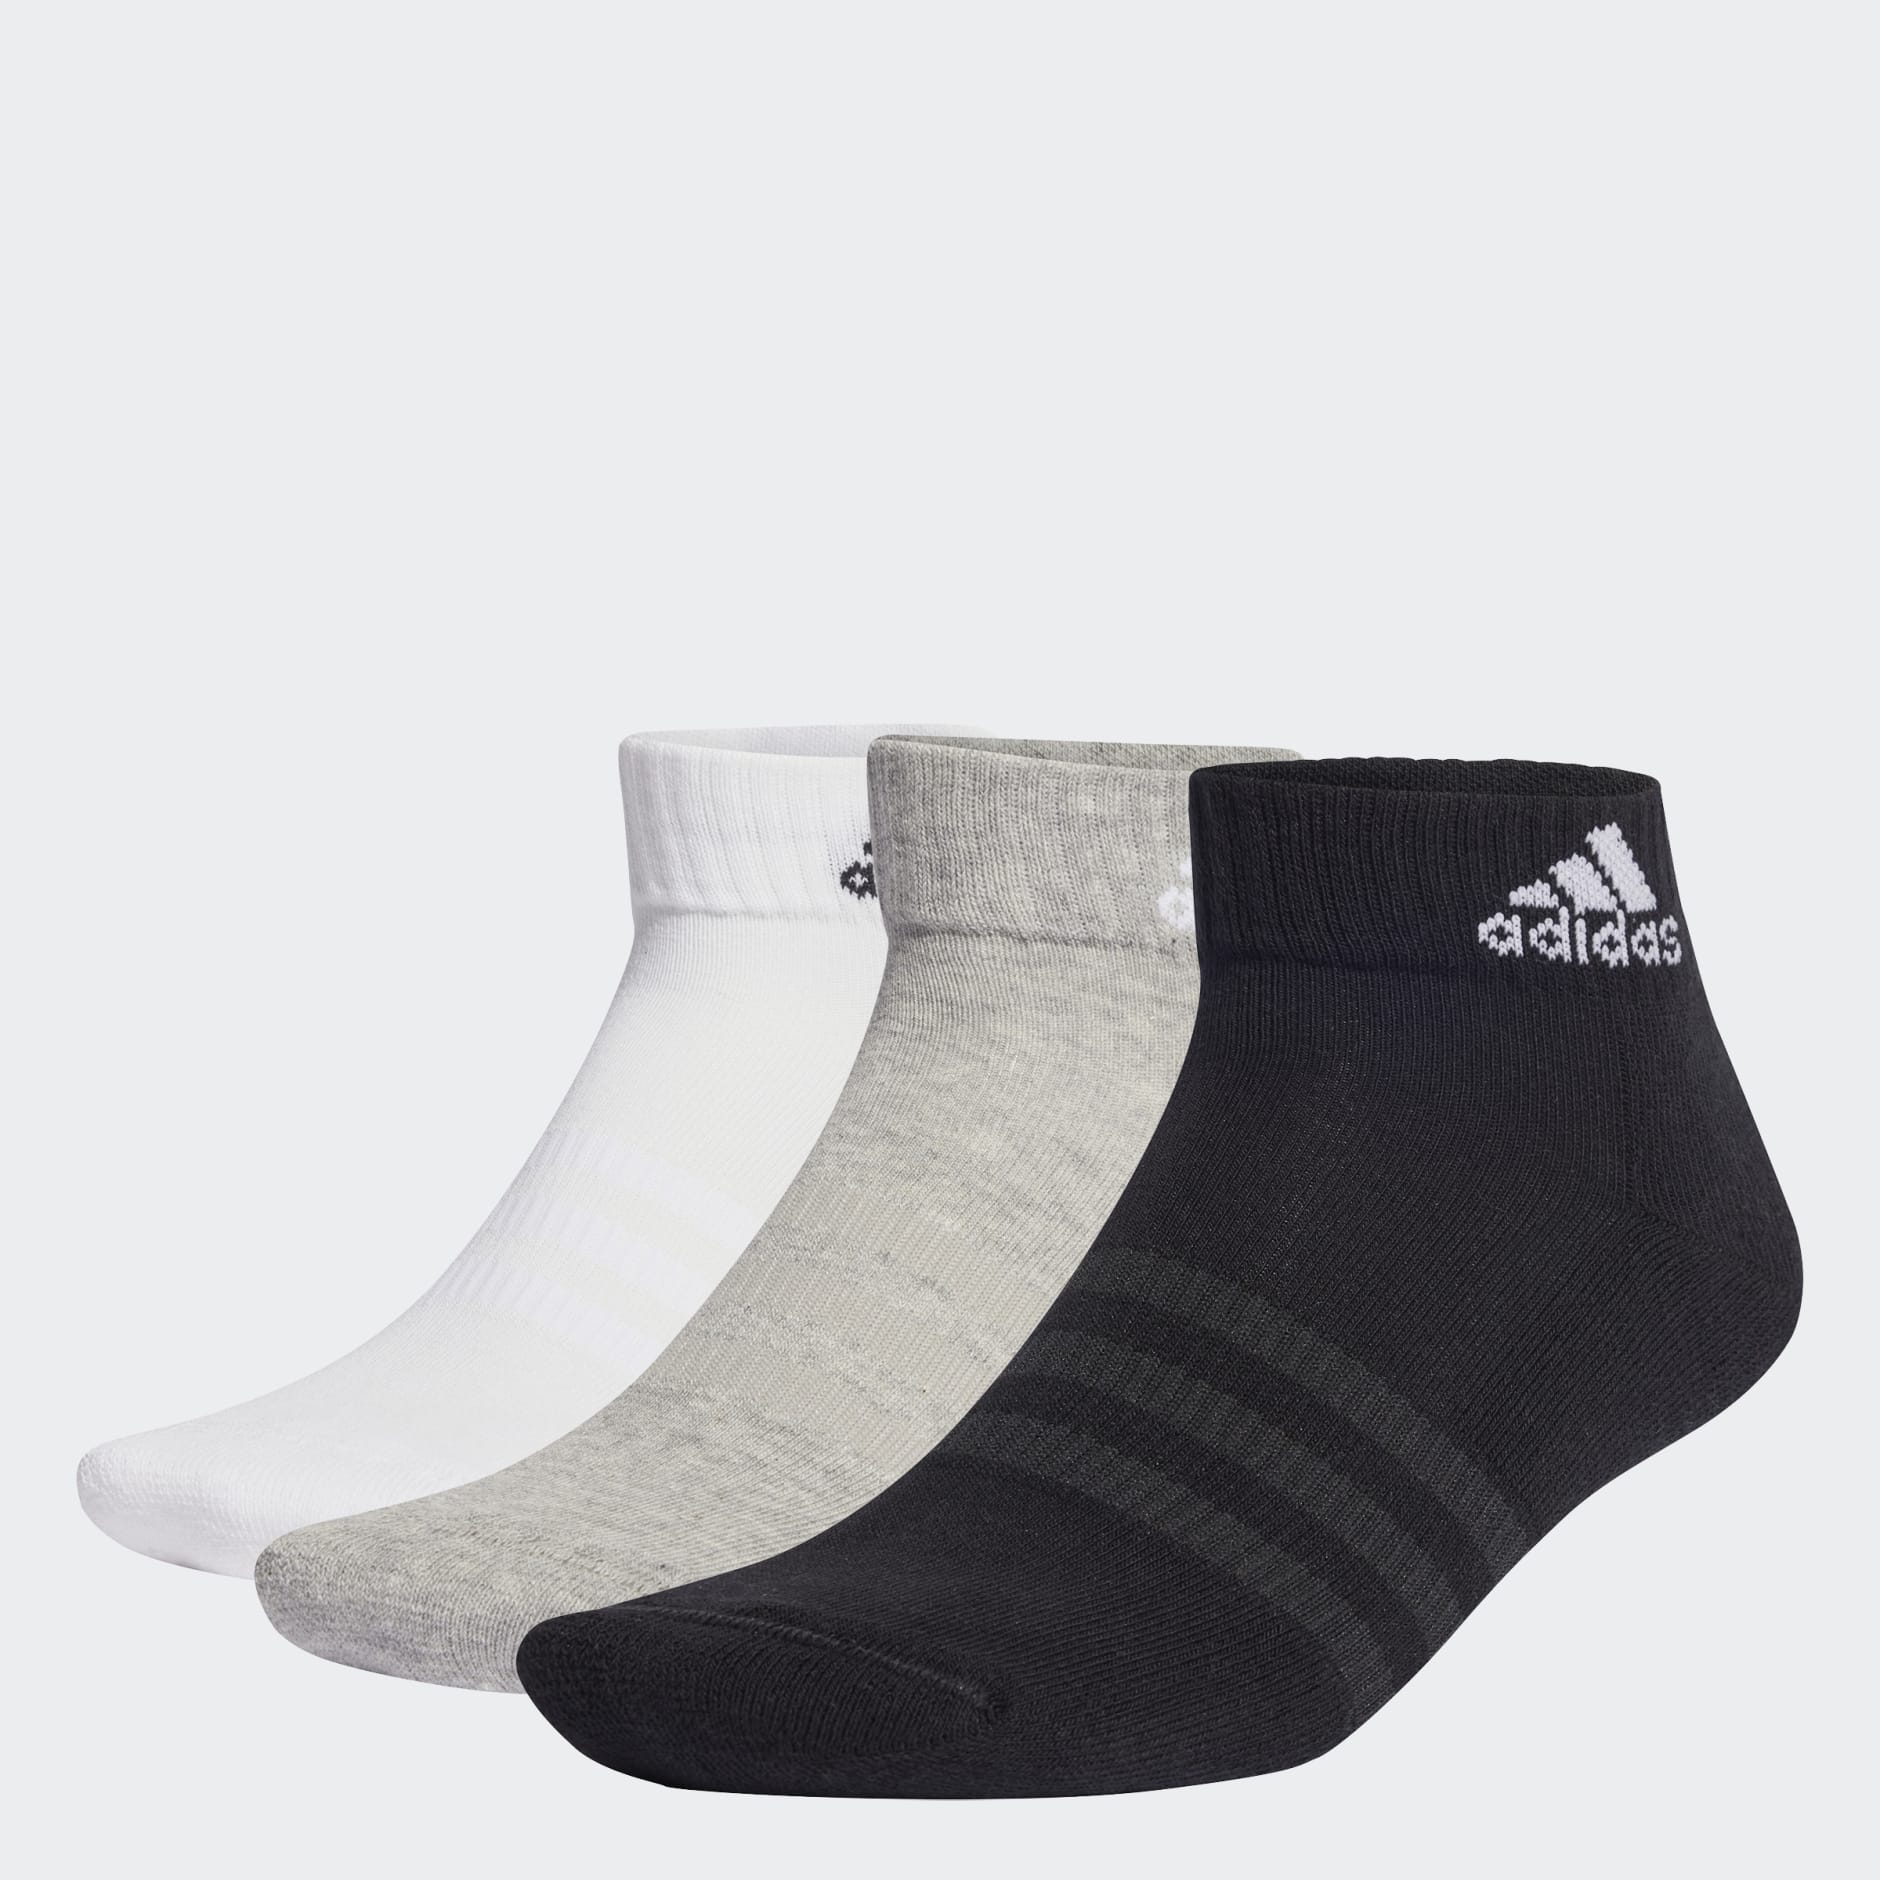 Accessories - Cushioned Sportswear Ankle Socks 6 Pairs - Grey | adidas ...